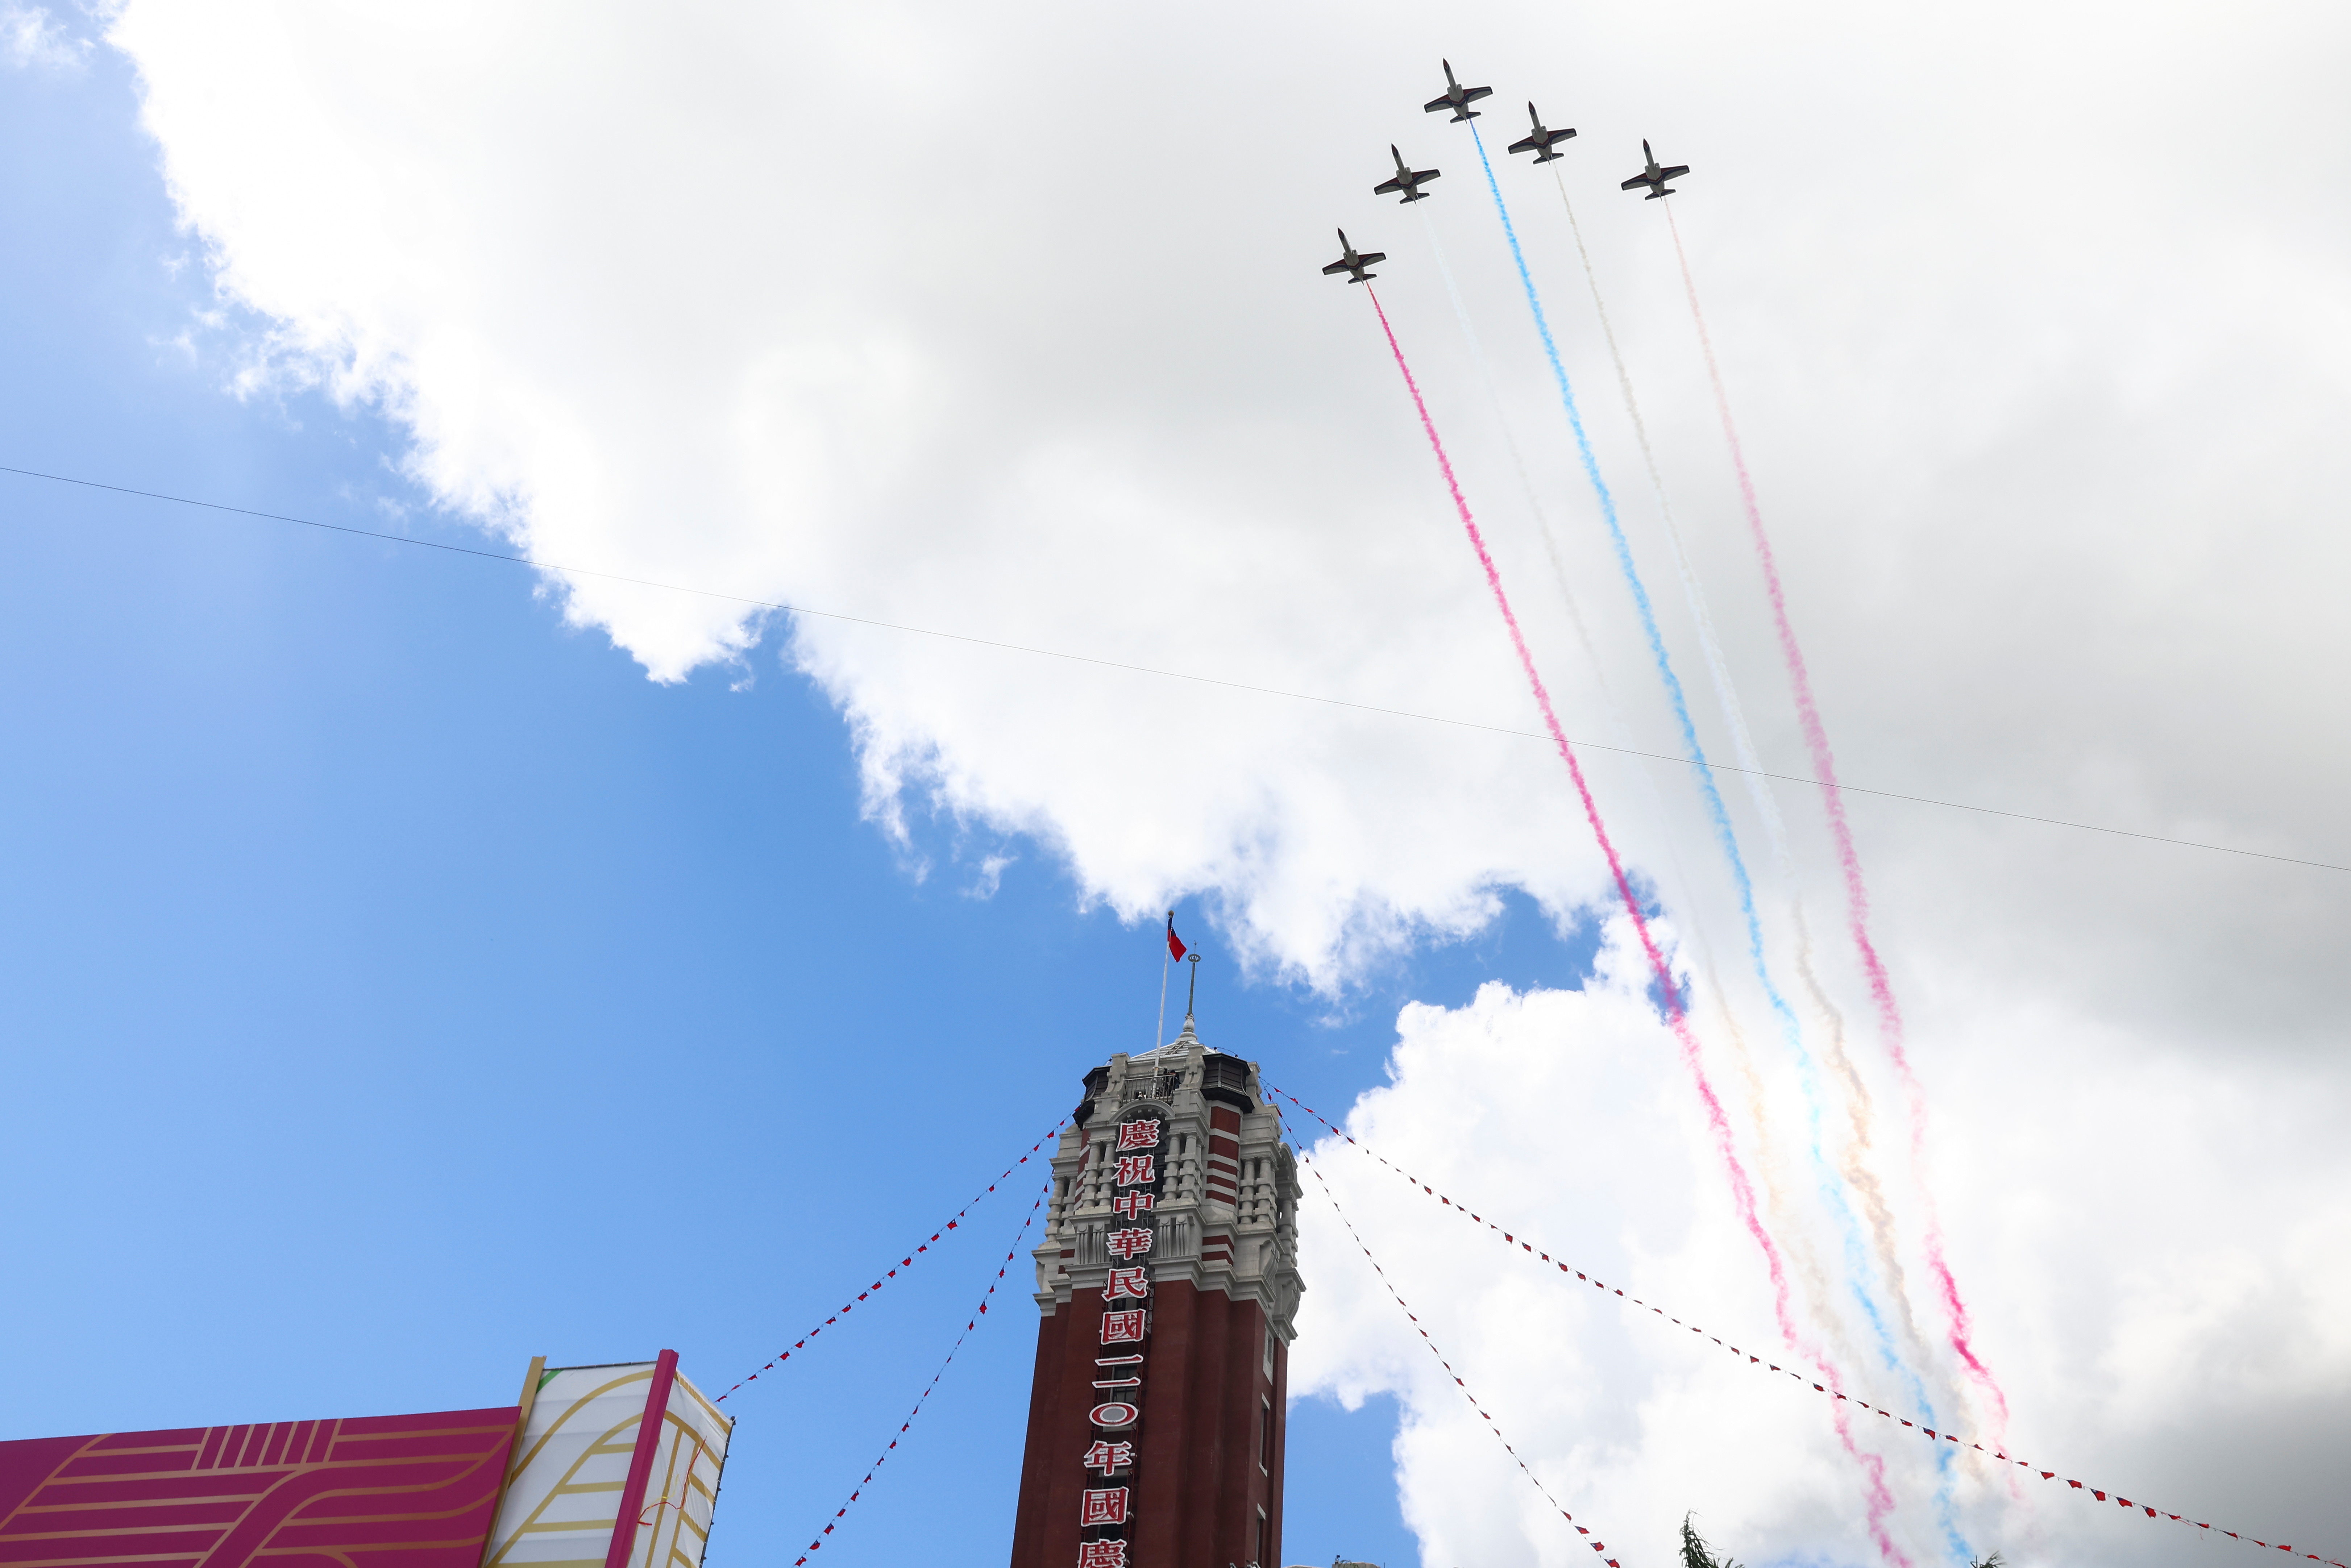 A formation of airplanes fly during the national day celebration in Taipei, Taiwan, October 10,2021. REUTERS/ Ann Wang